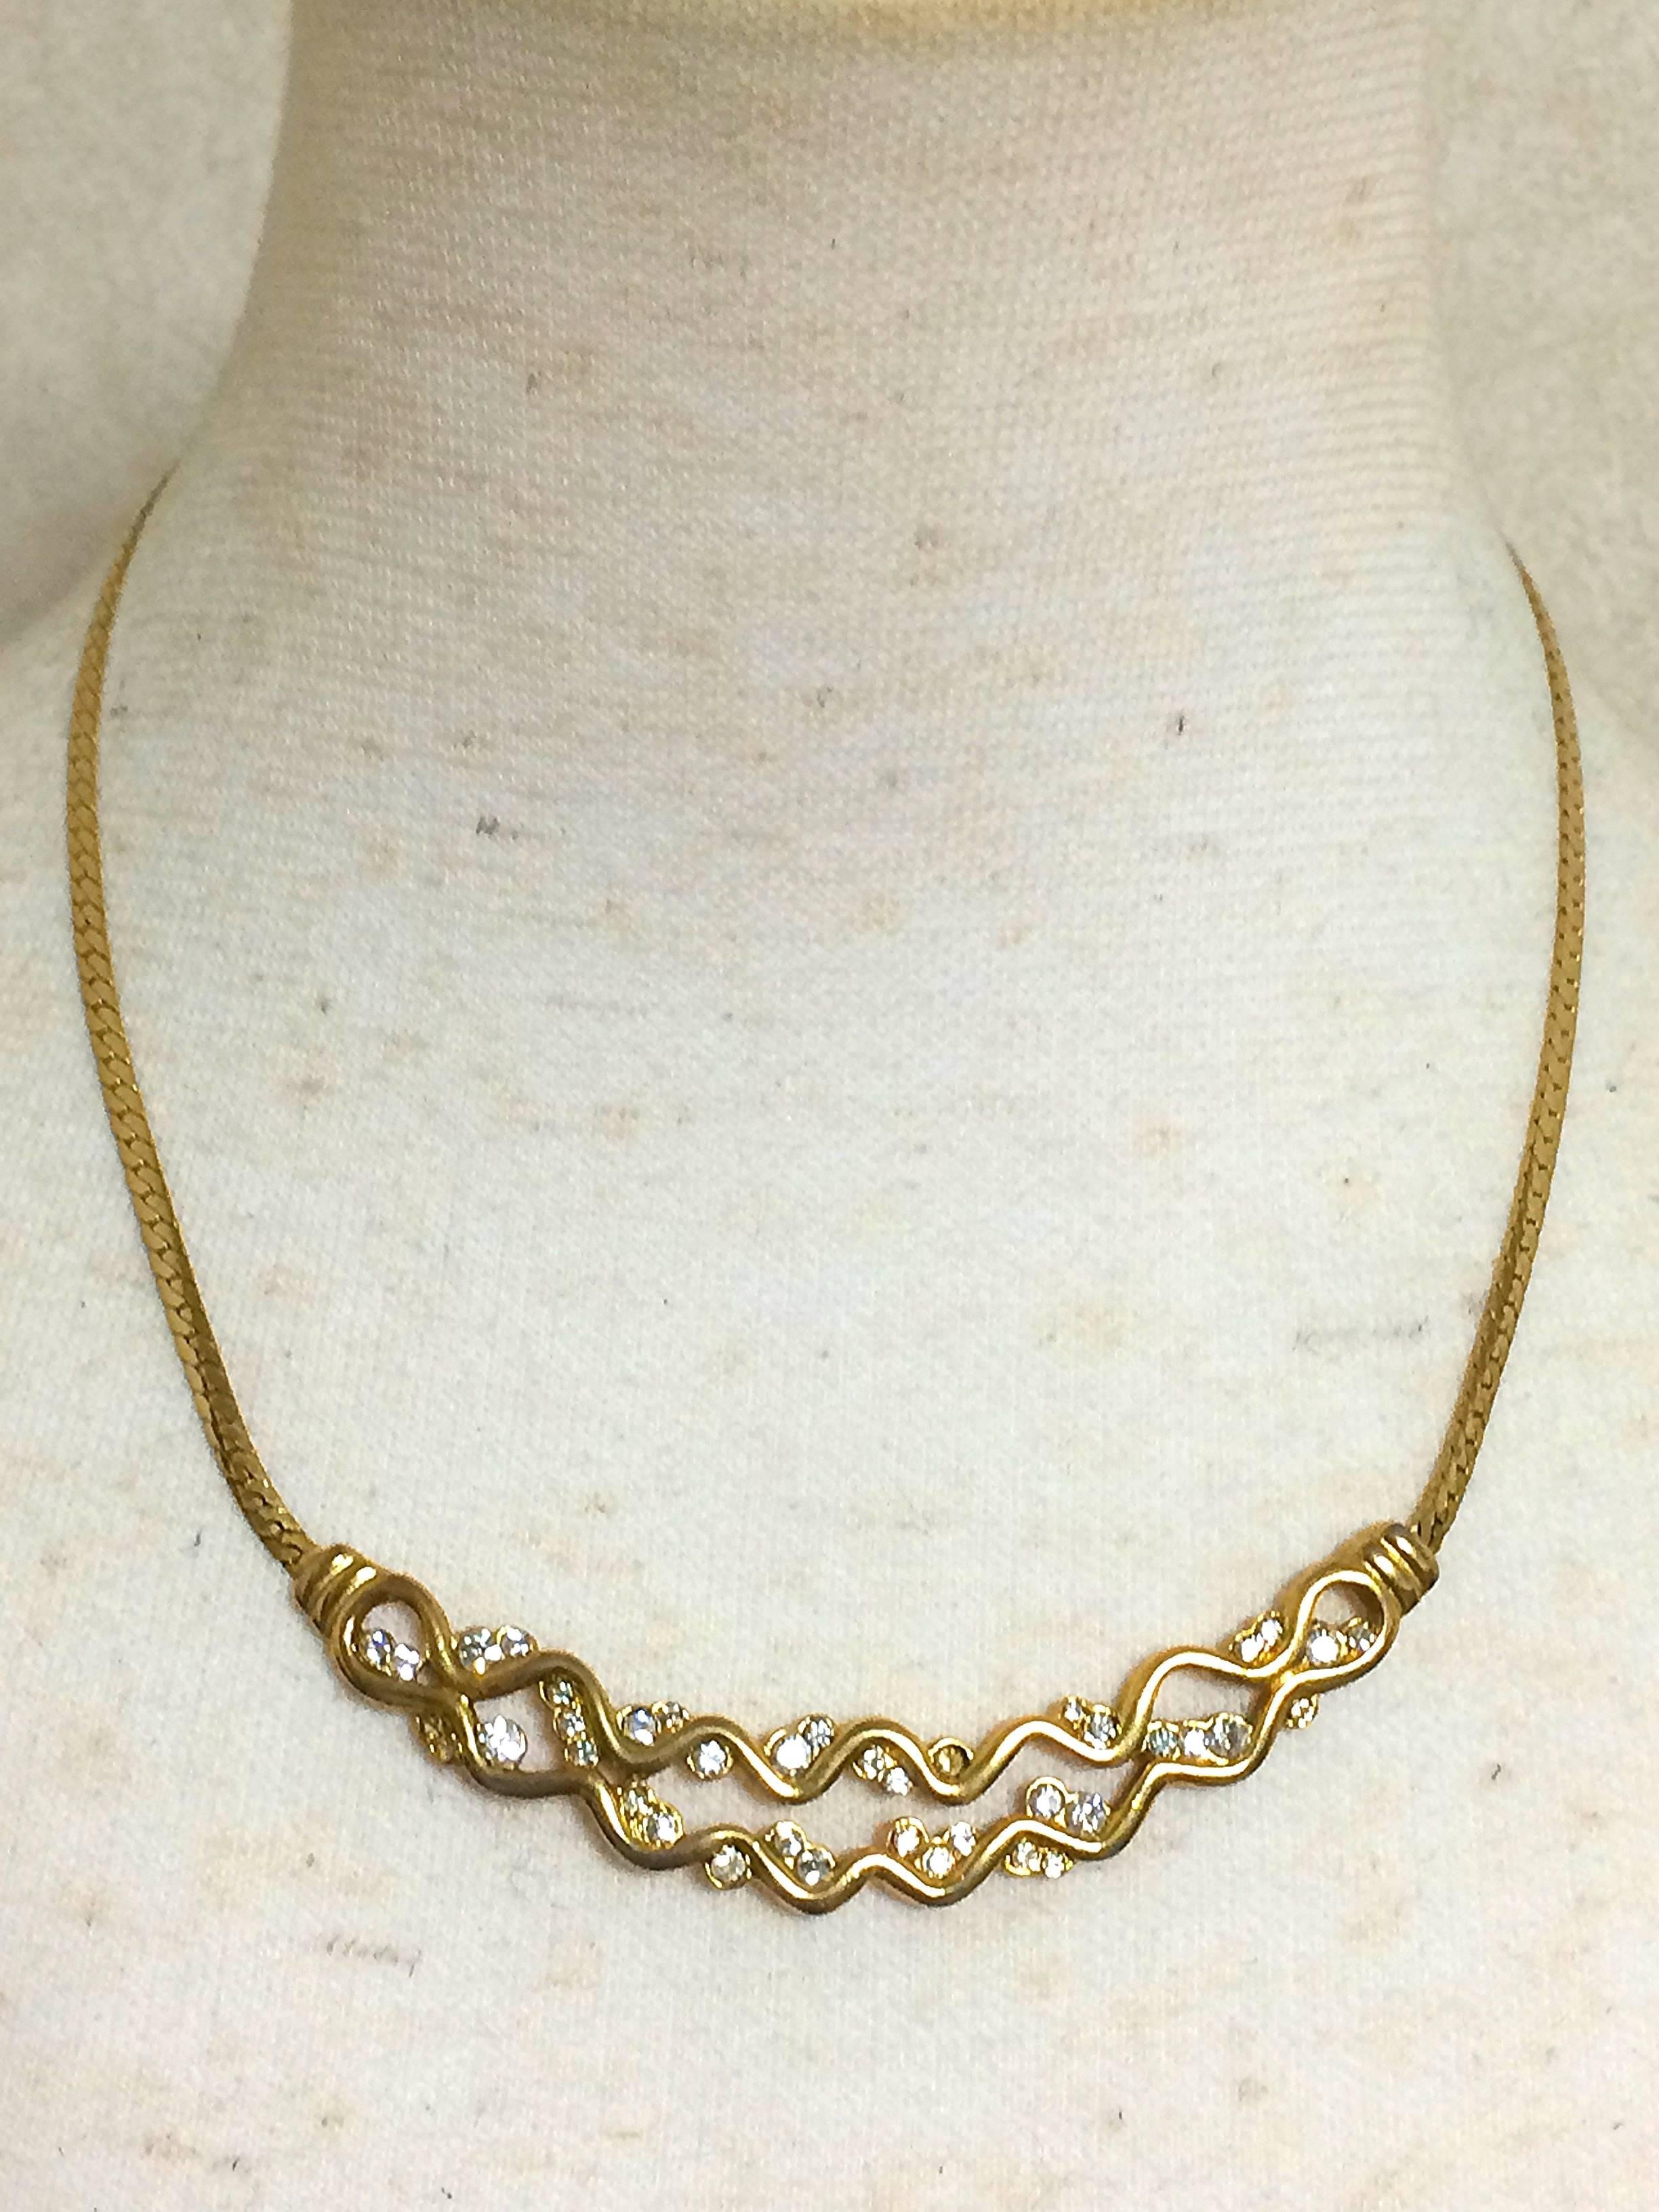 Vintage Givenchy double wave design flap chain necklace with rhinestone crystals For Sale 3